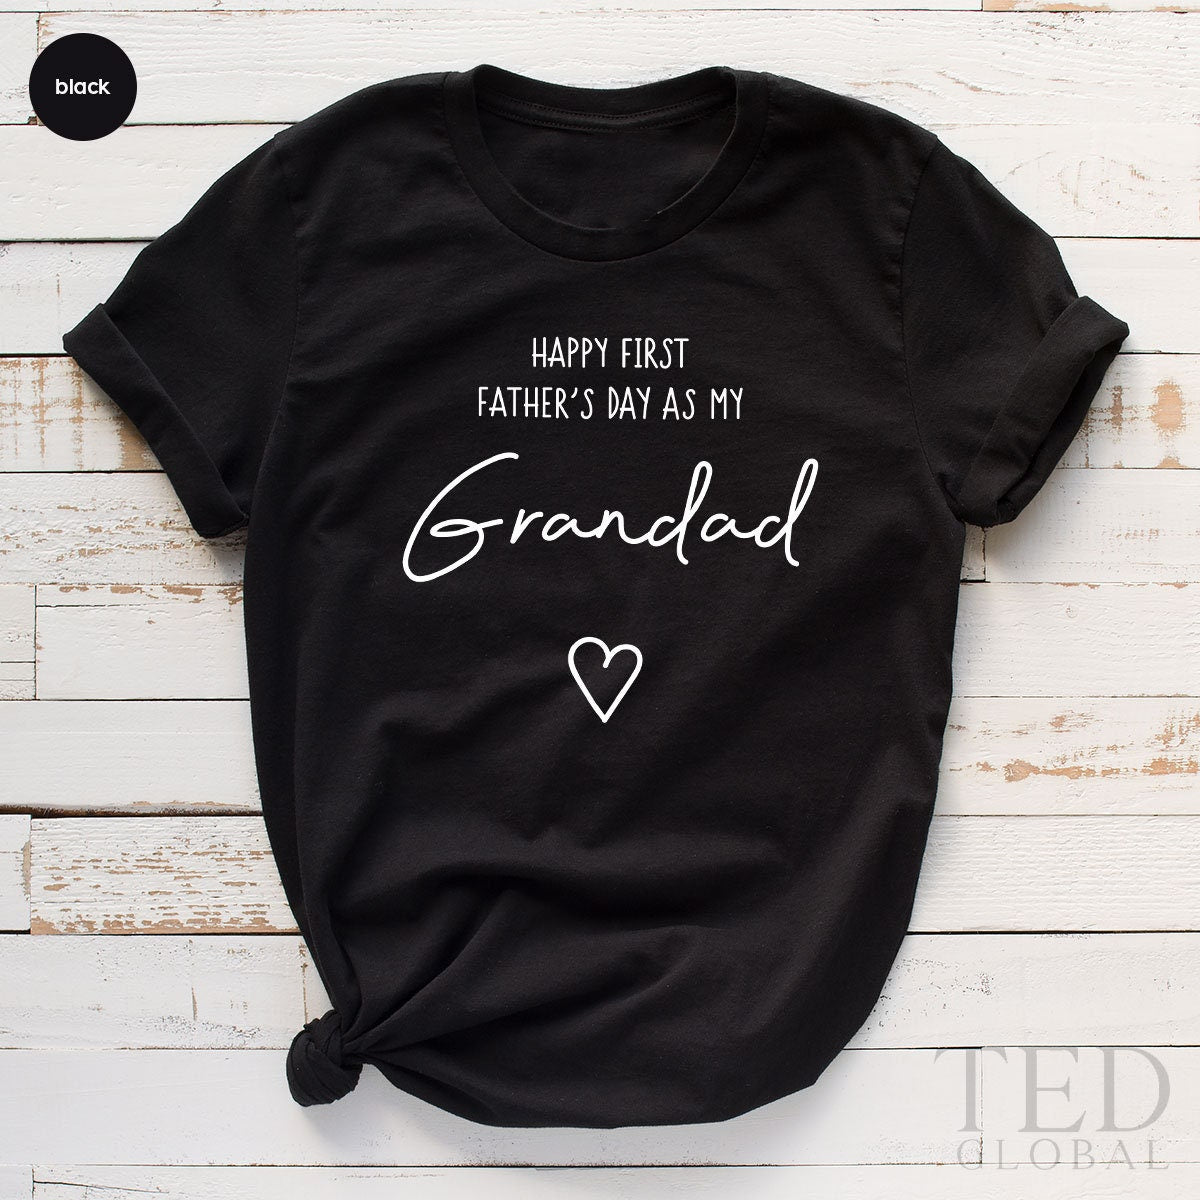 First Fathers Day  Shirt, Grandad Shirt, New Grandpa Shirt, Grandpa Fathers Day Gift, Grandpa To Be Shirt, Baby Announcement For Dad - Fastdeliverytees.com